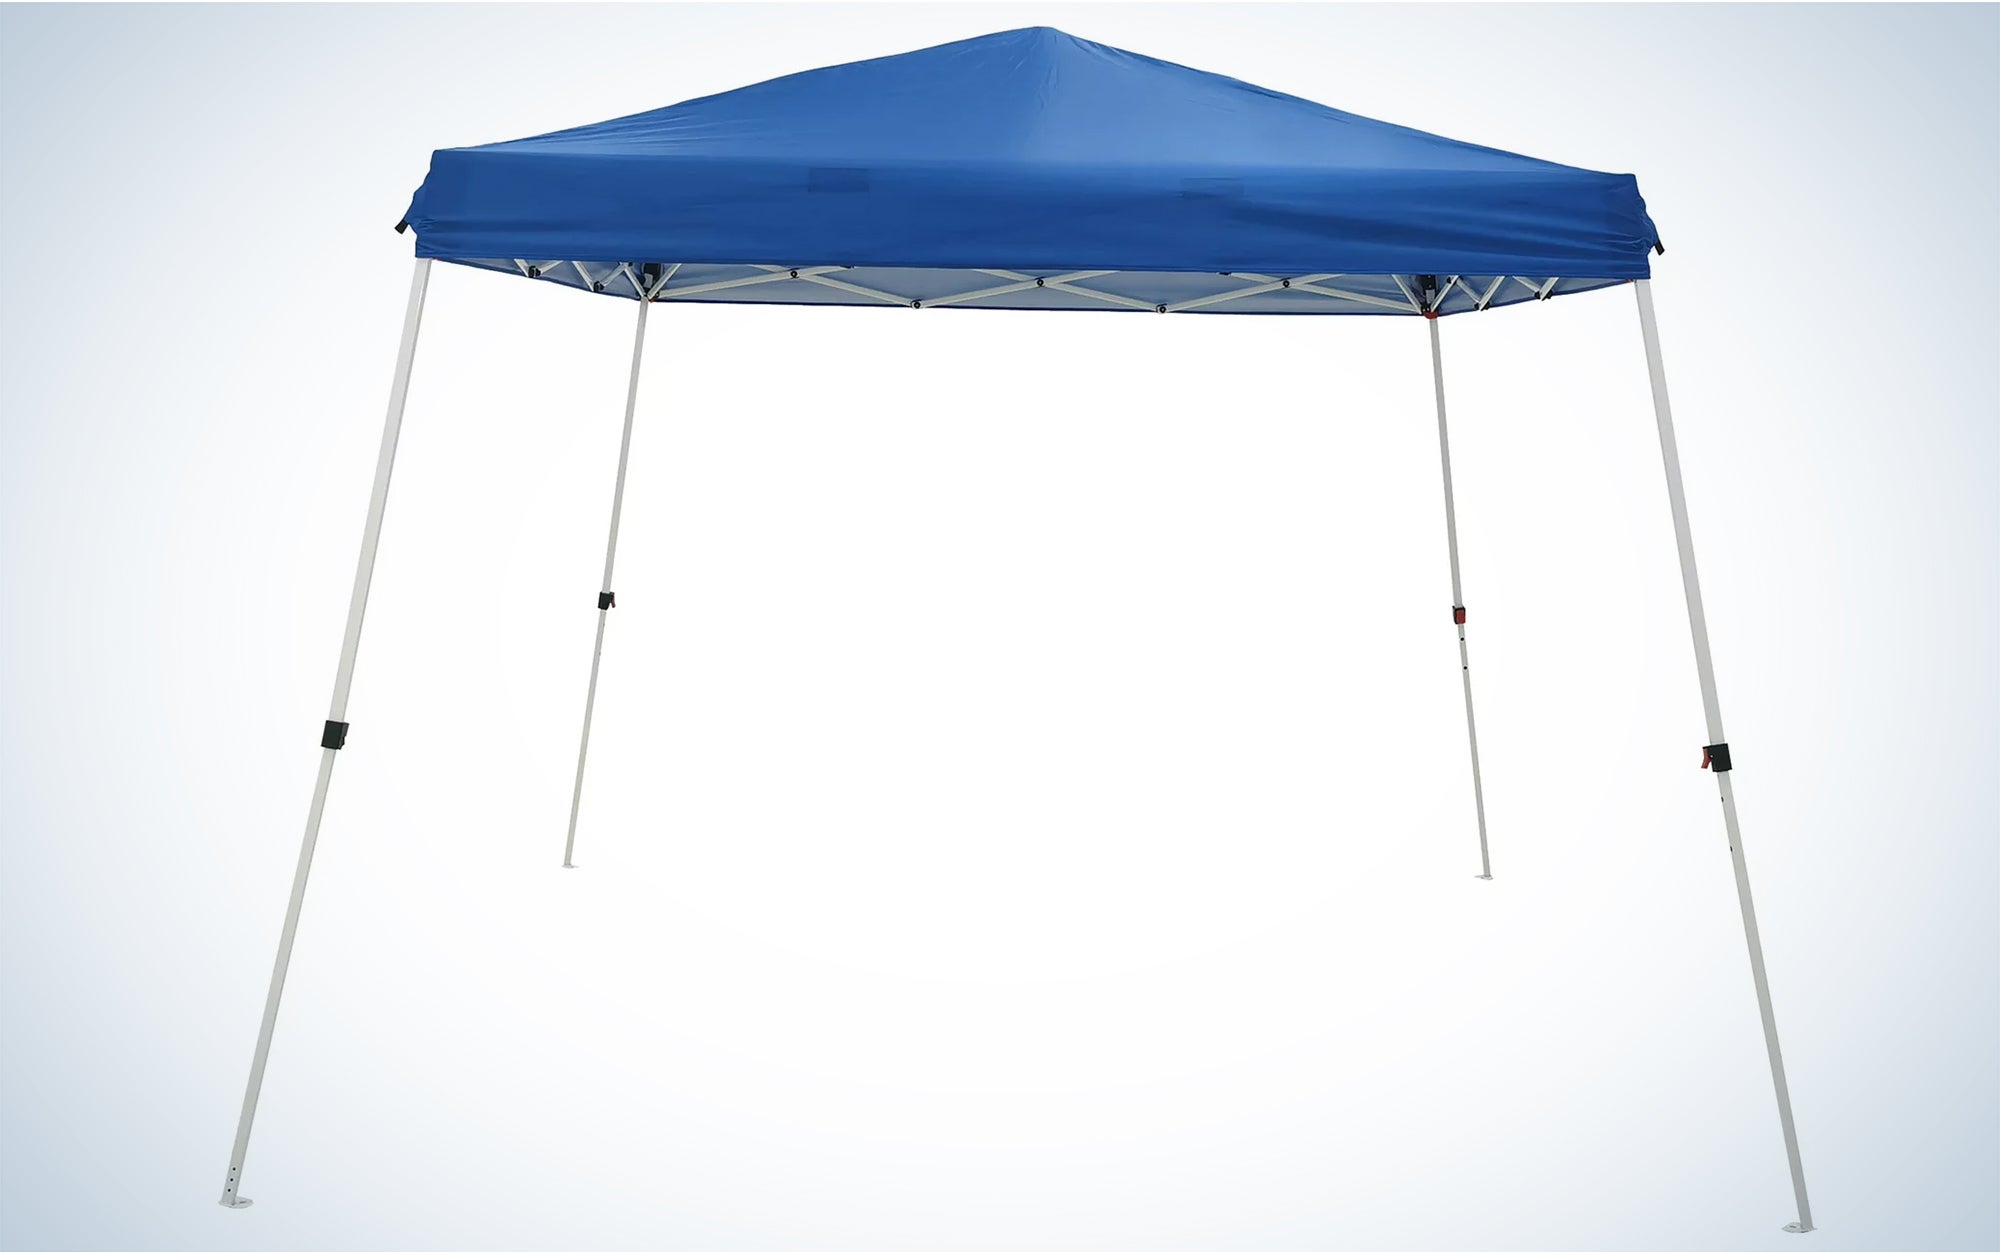 The Ozark Trail Canopy is the best budget canopy tent.